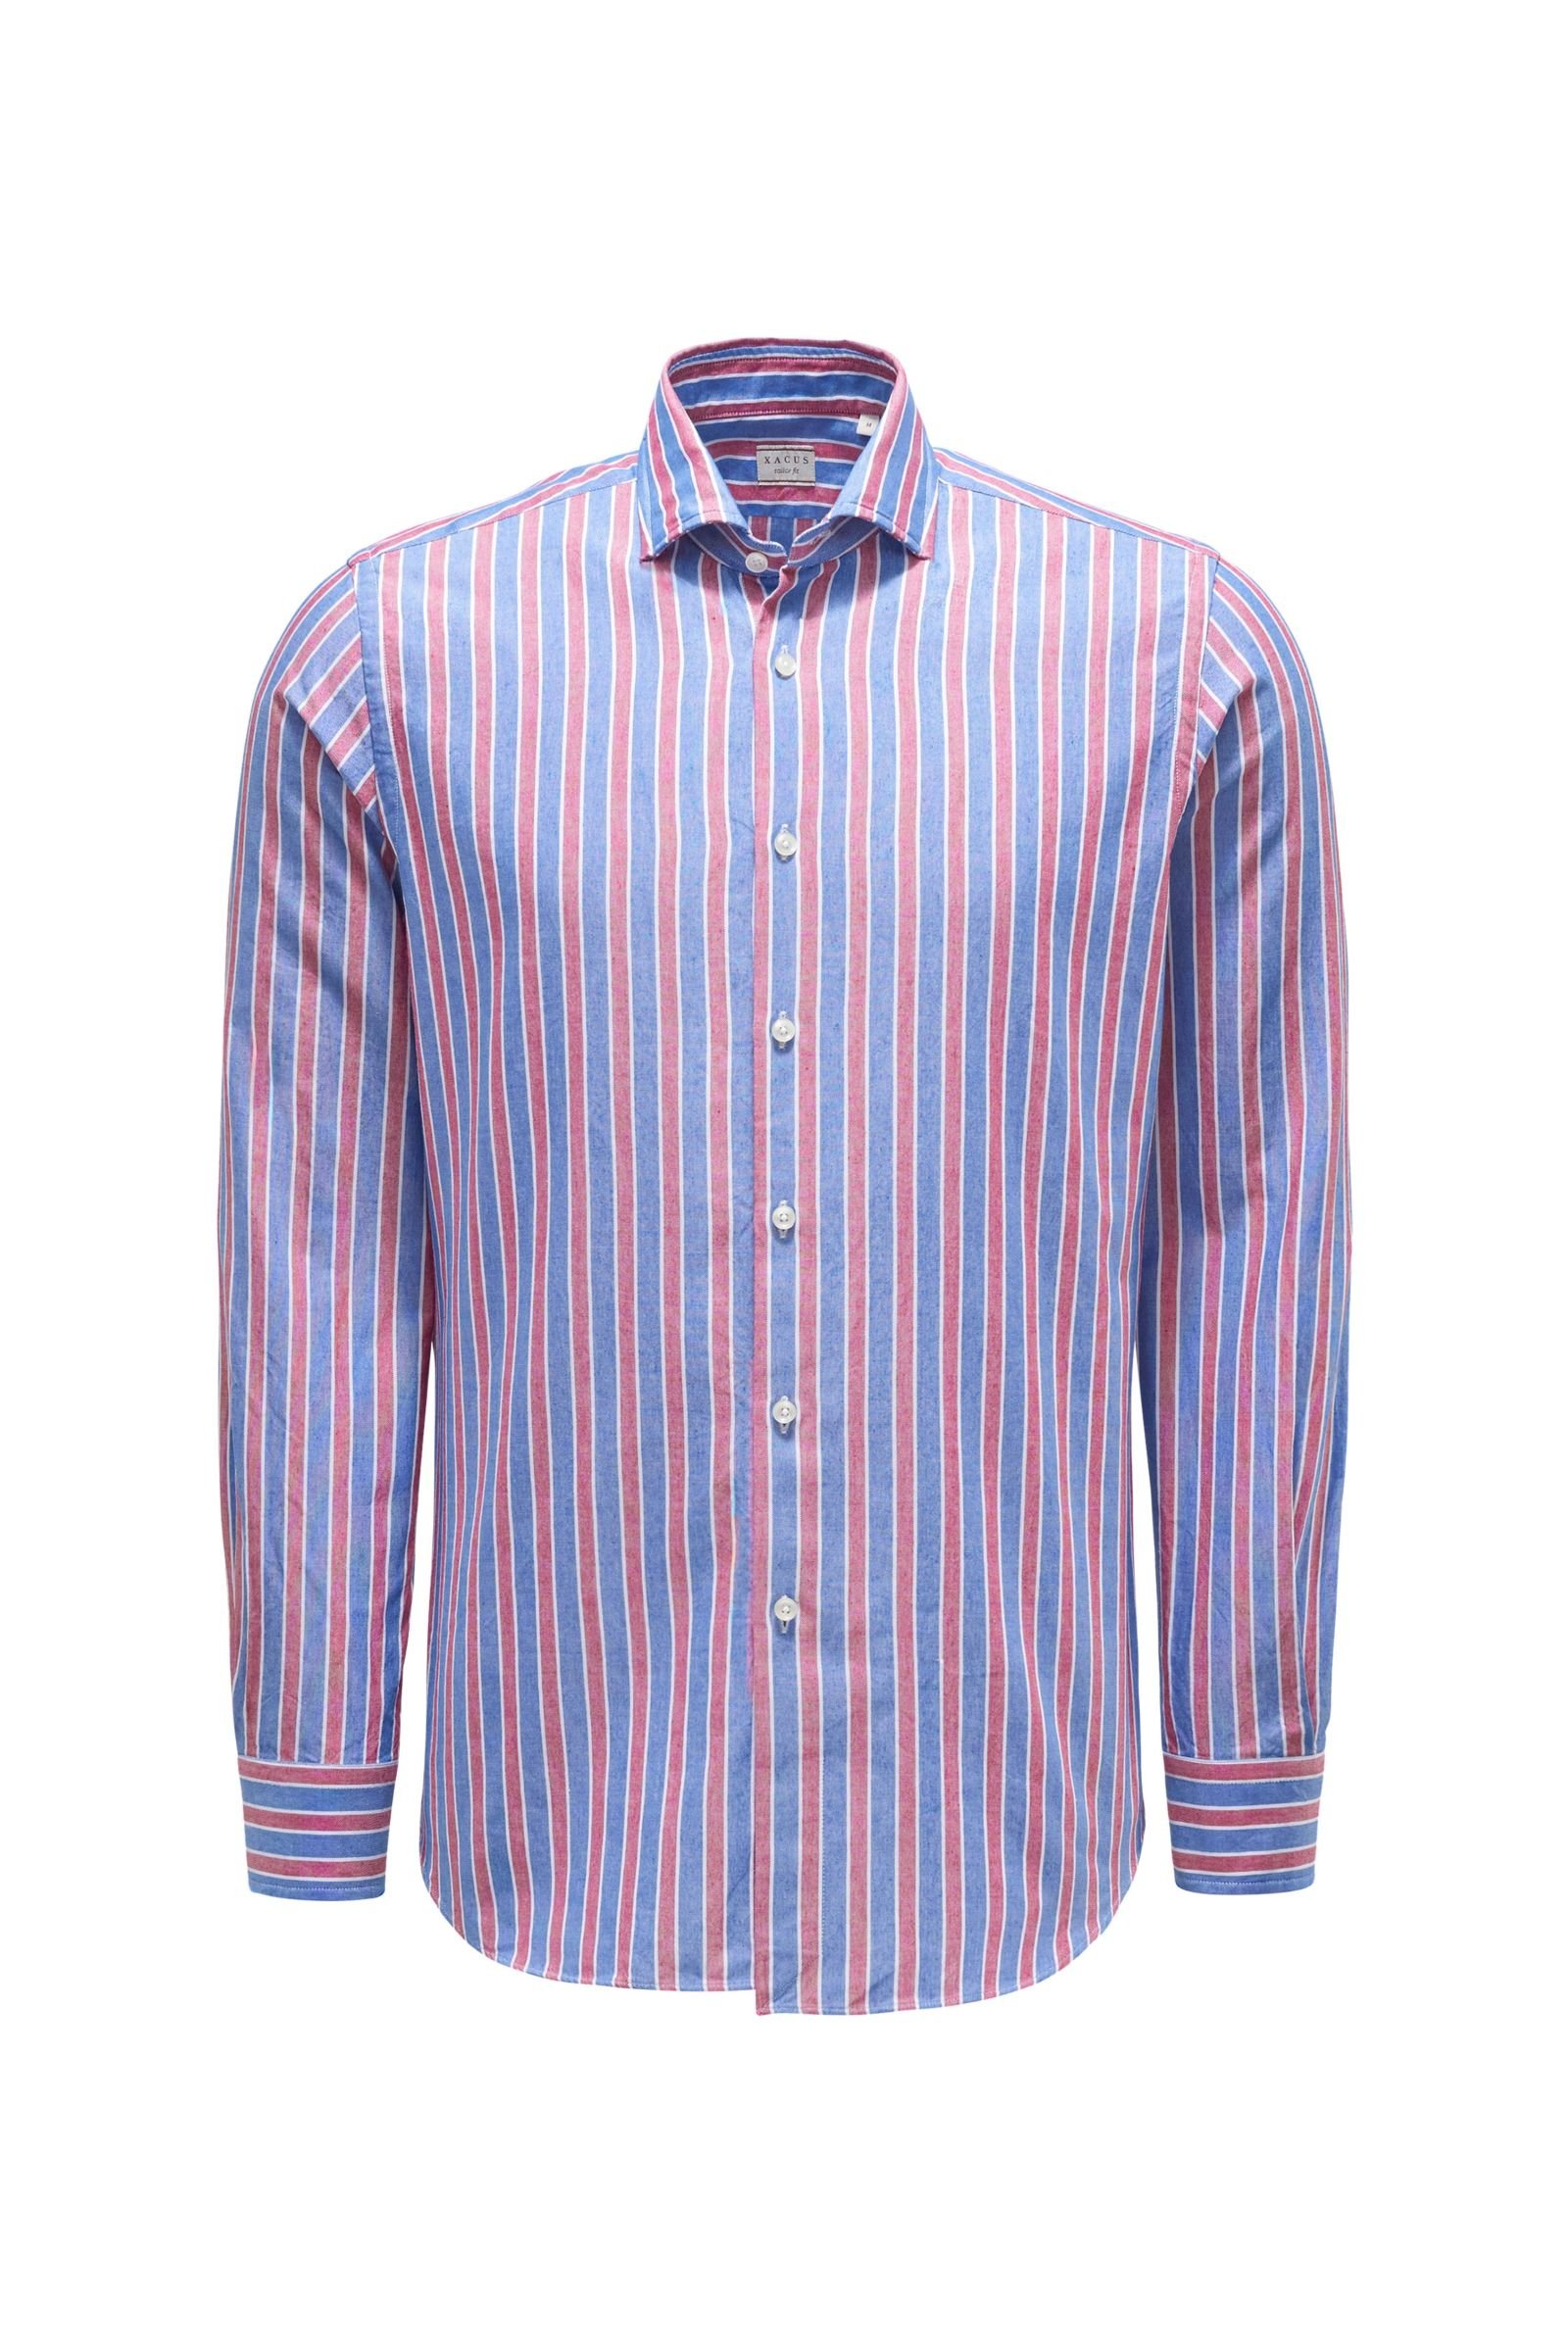 Casual shirt 'Tailor Fit' shark collar blue/red striped